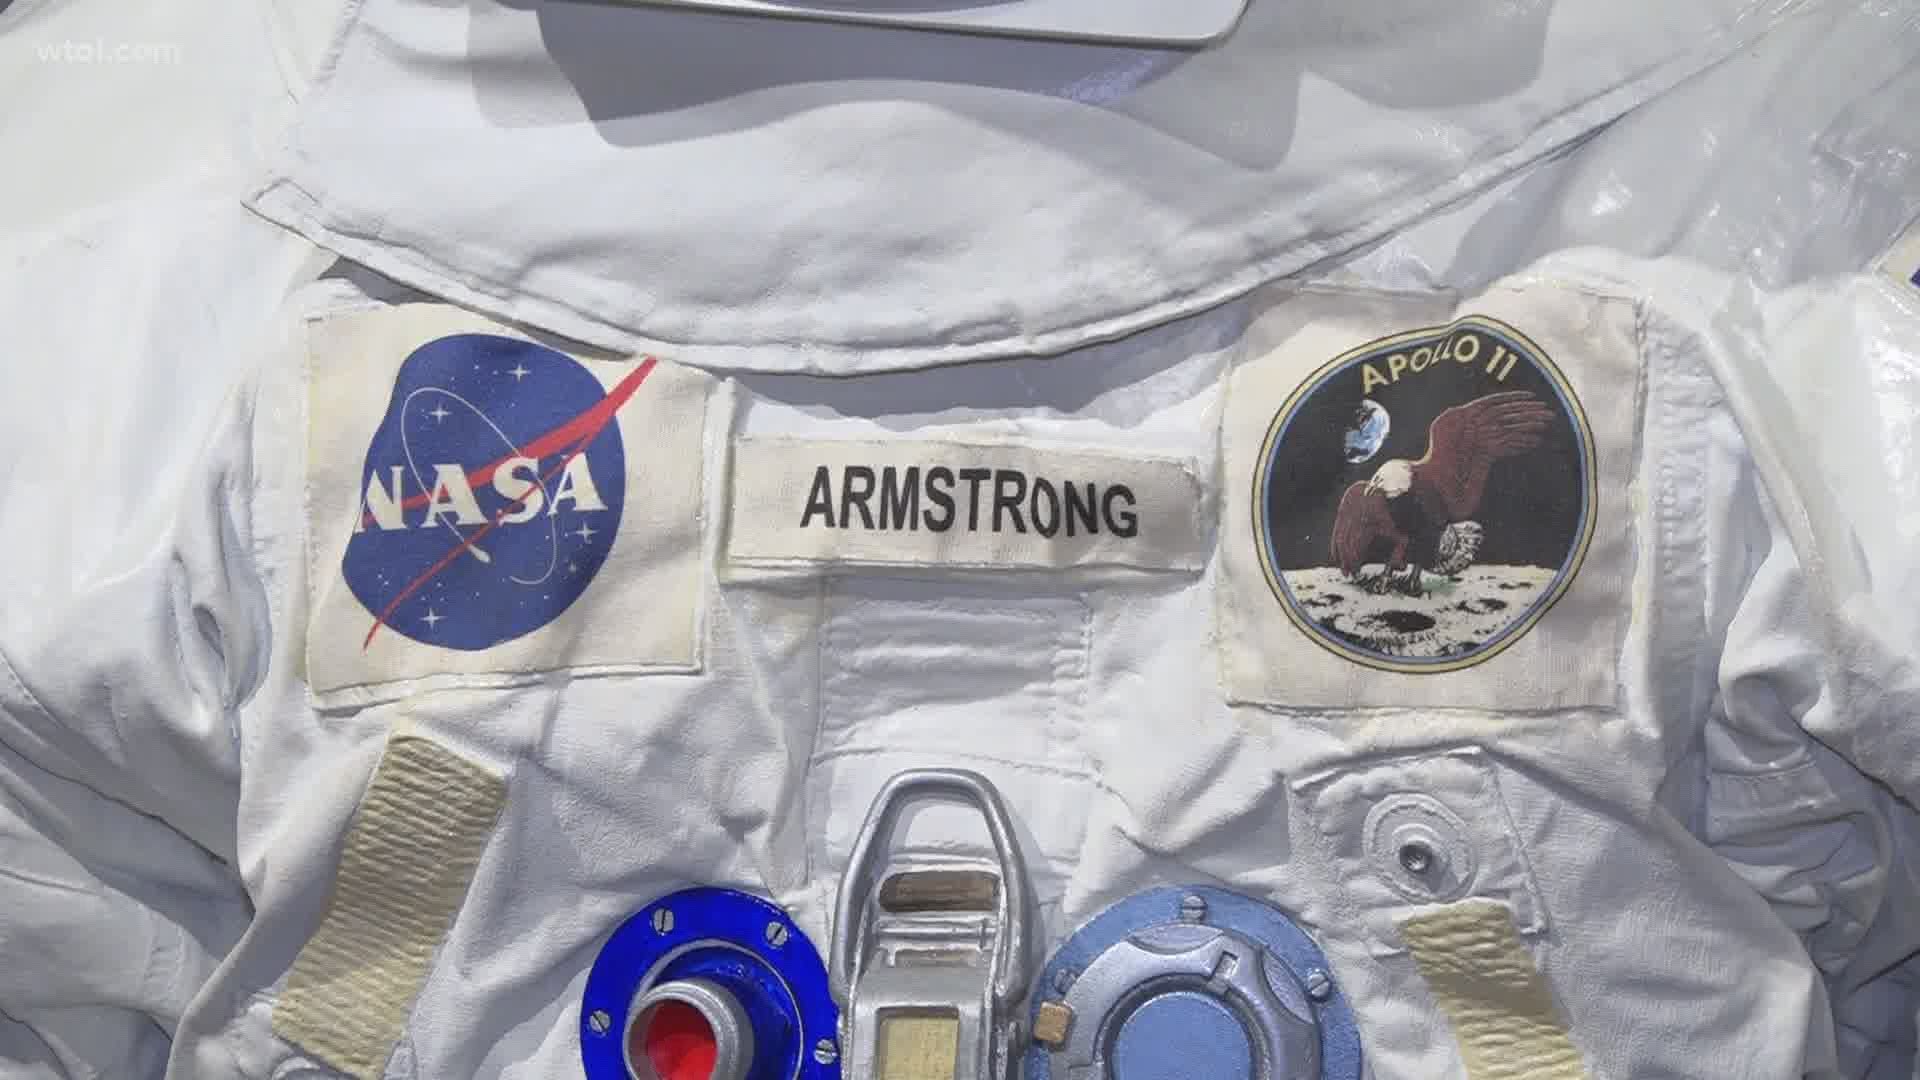 The Wapakoneta-based museum is preparing to celebrate the 51st anniversary of the Apollo 11 mission, forever immortalizing its commander and the museum's namesake.